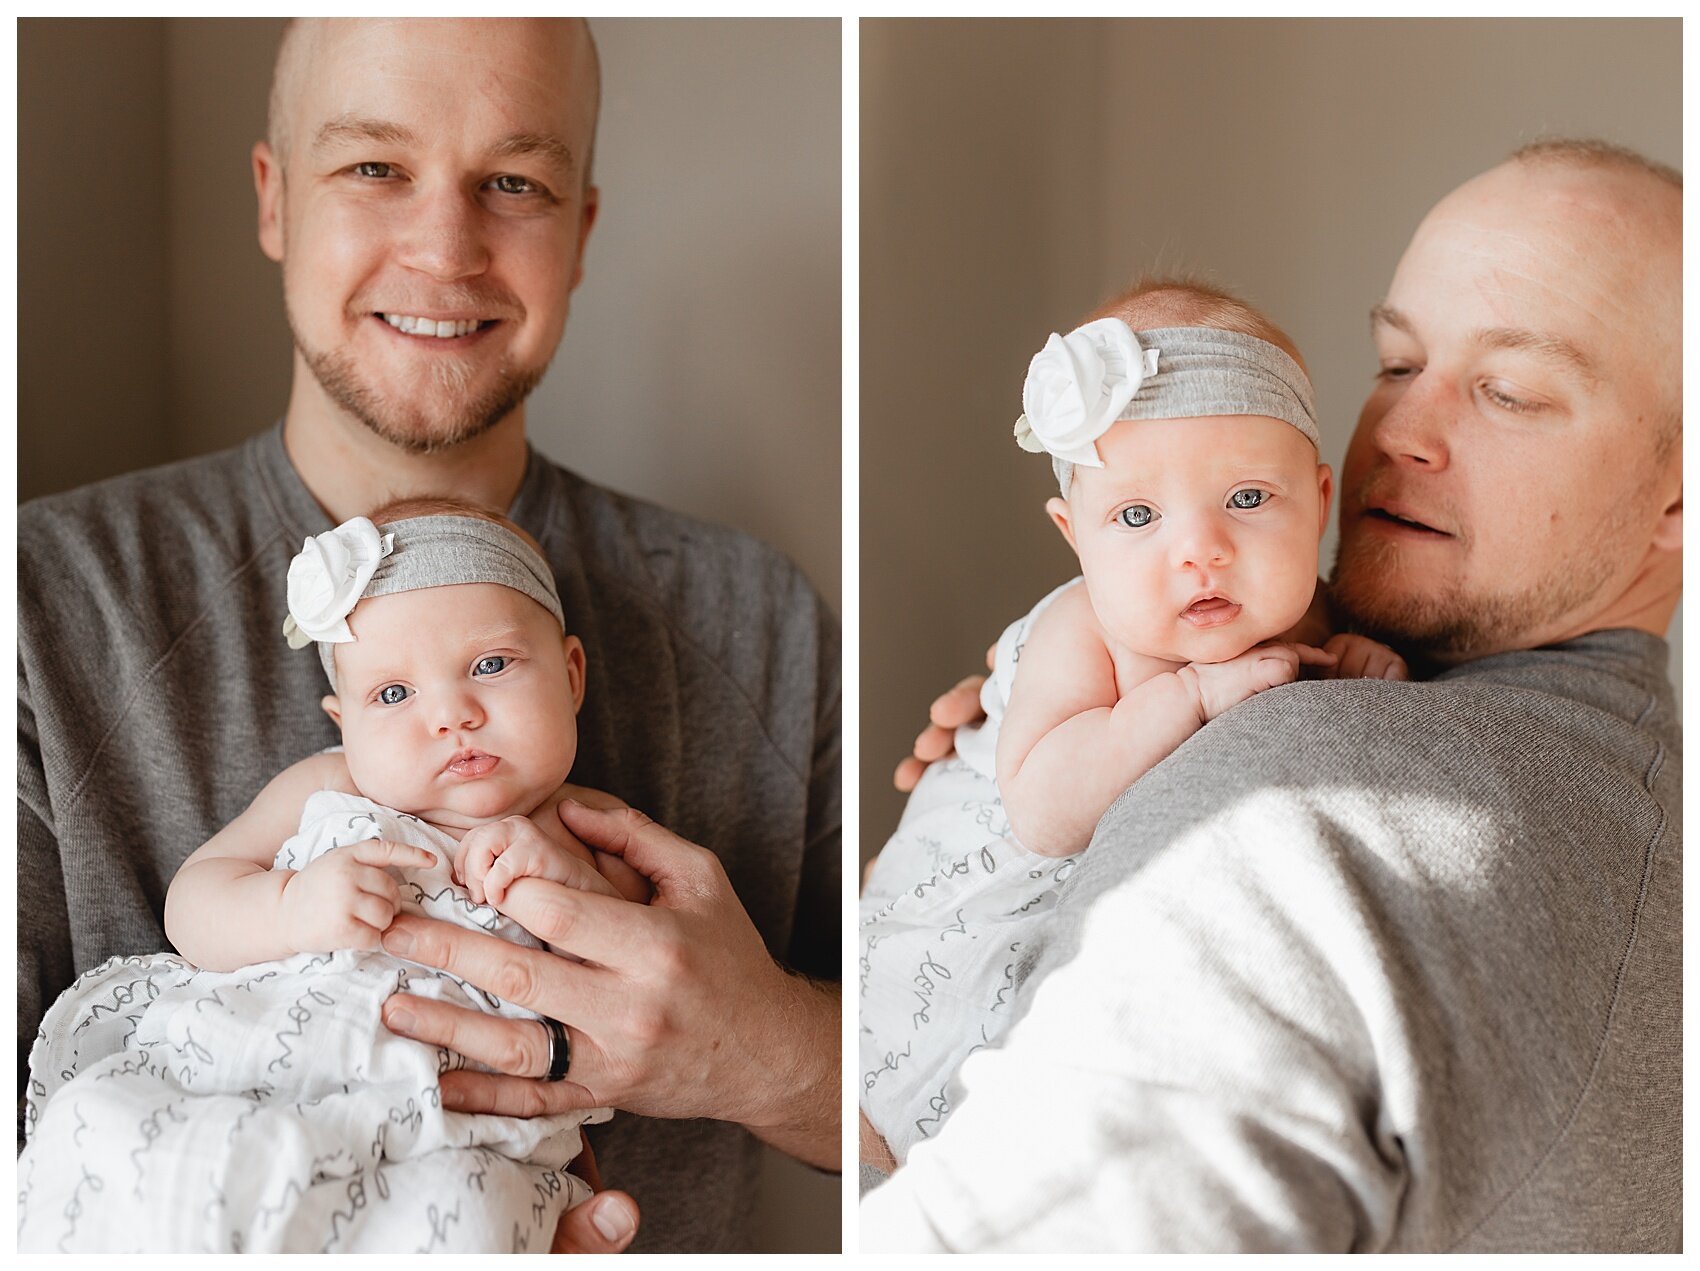 Dad and baby girl Photo